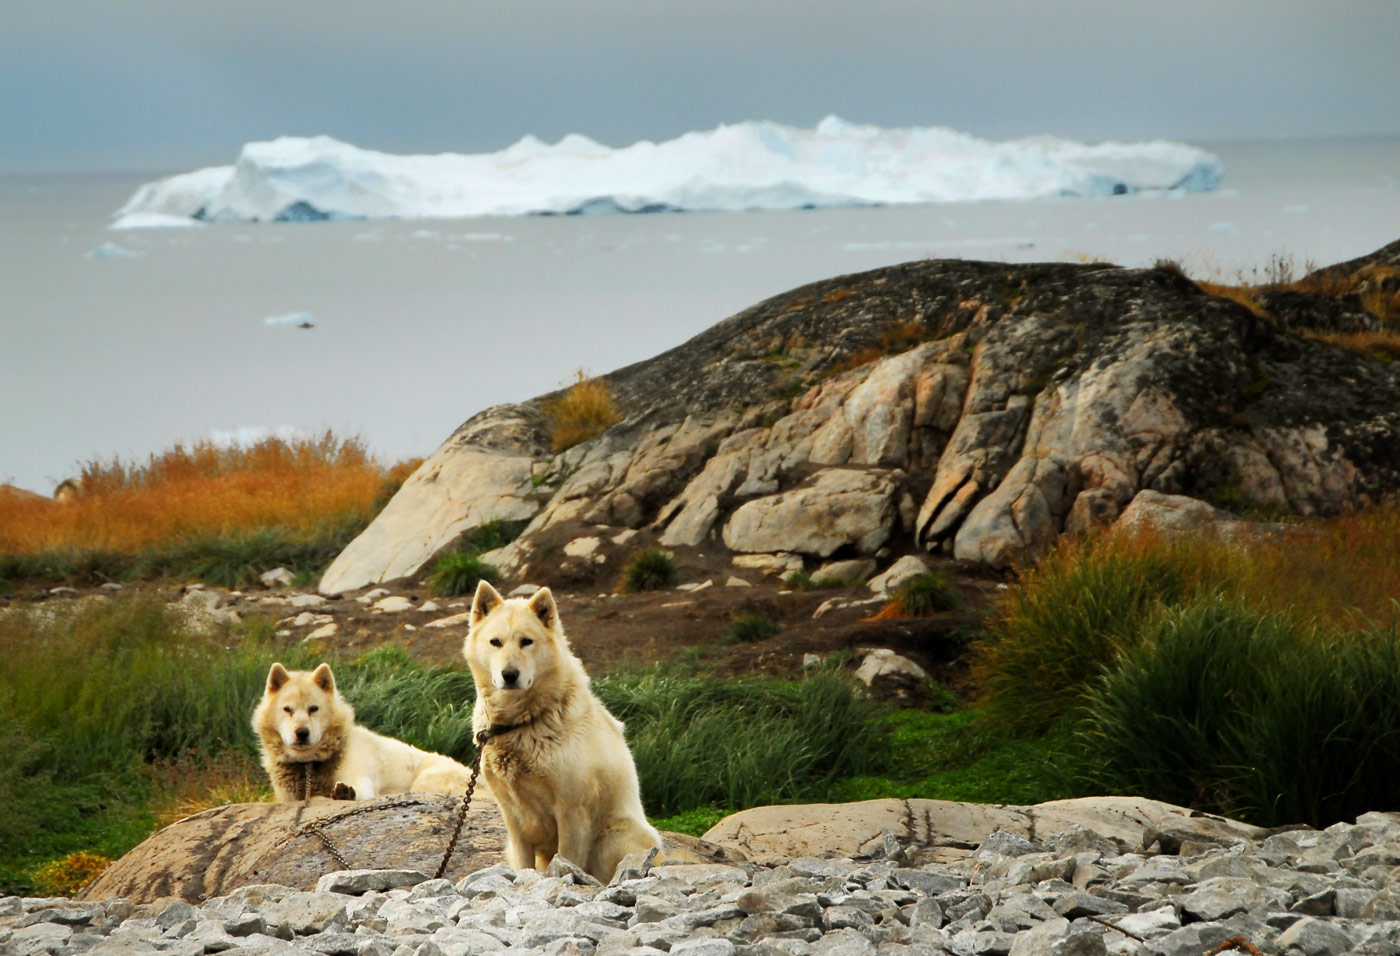 Ilulissat is know for having almost the same number of sled dogs as people, Ilulissat, 2007